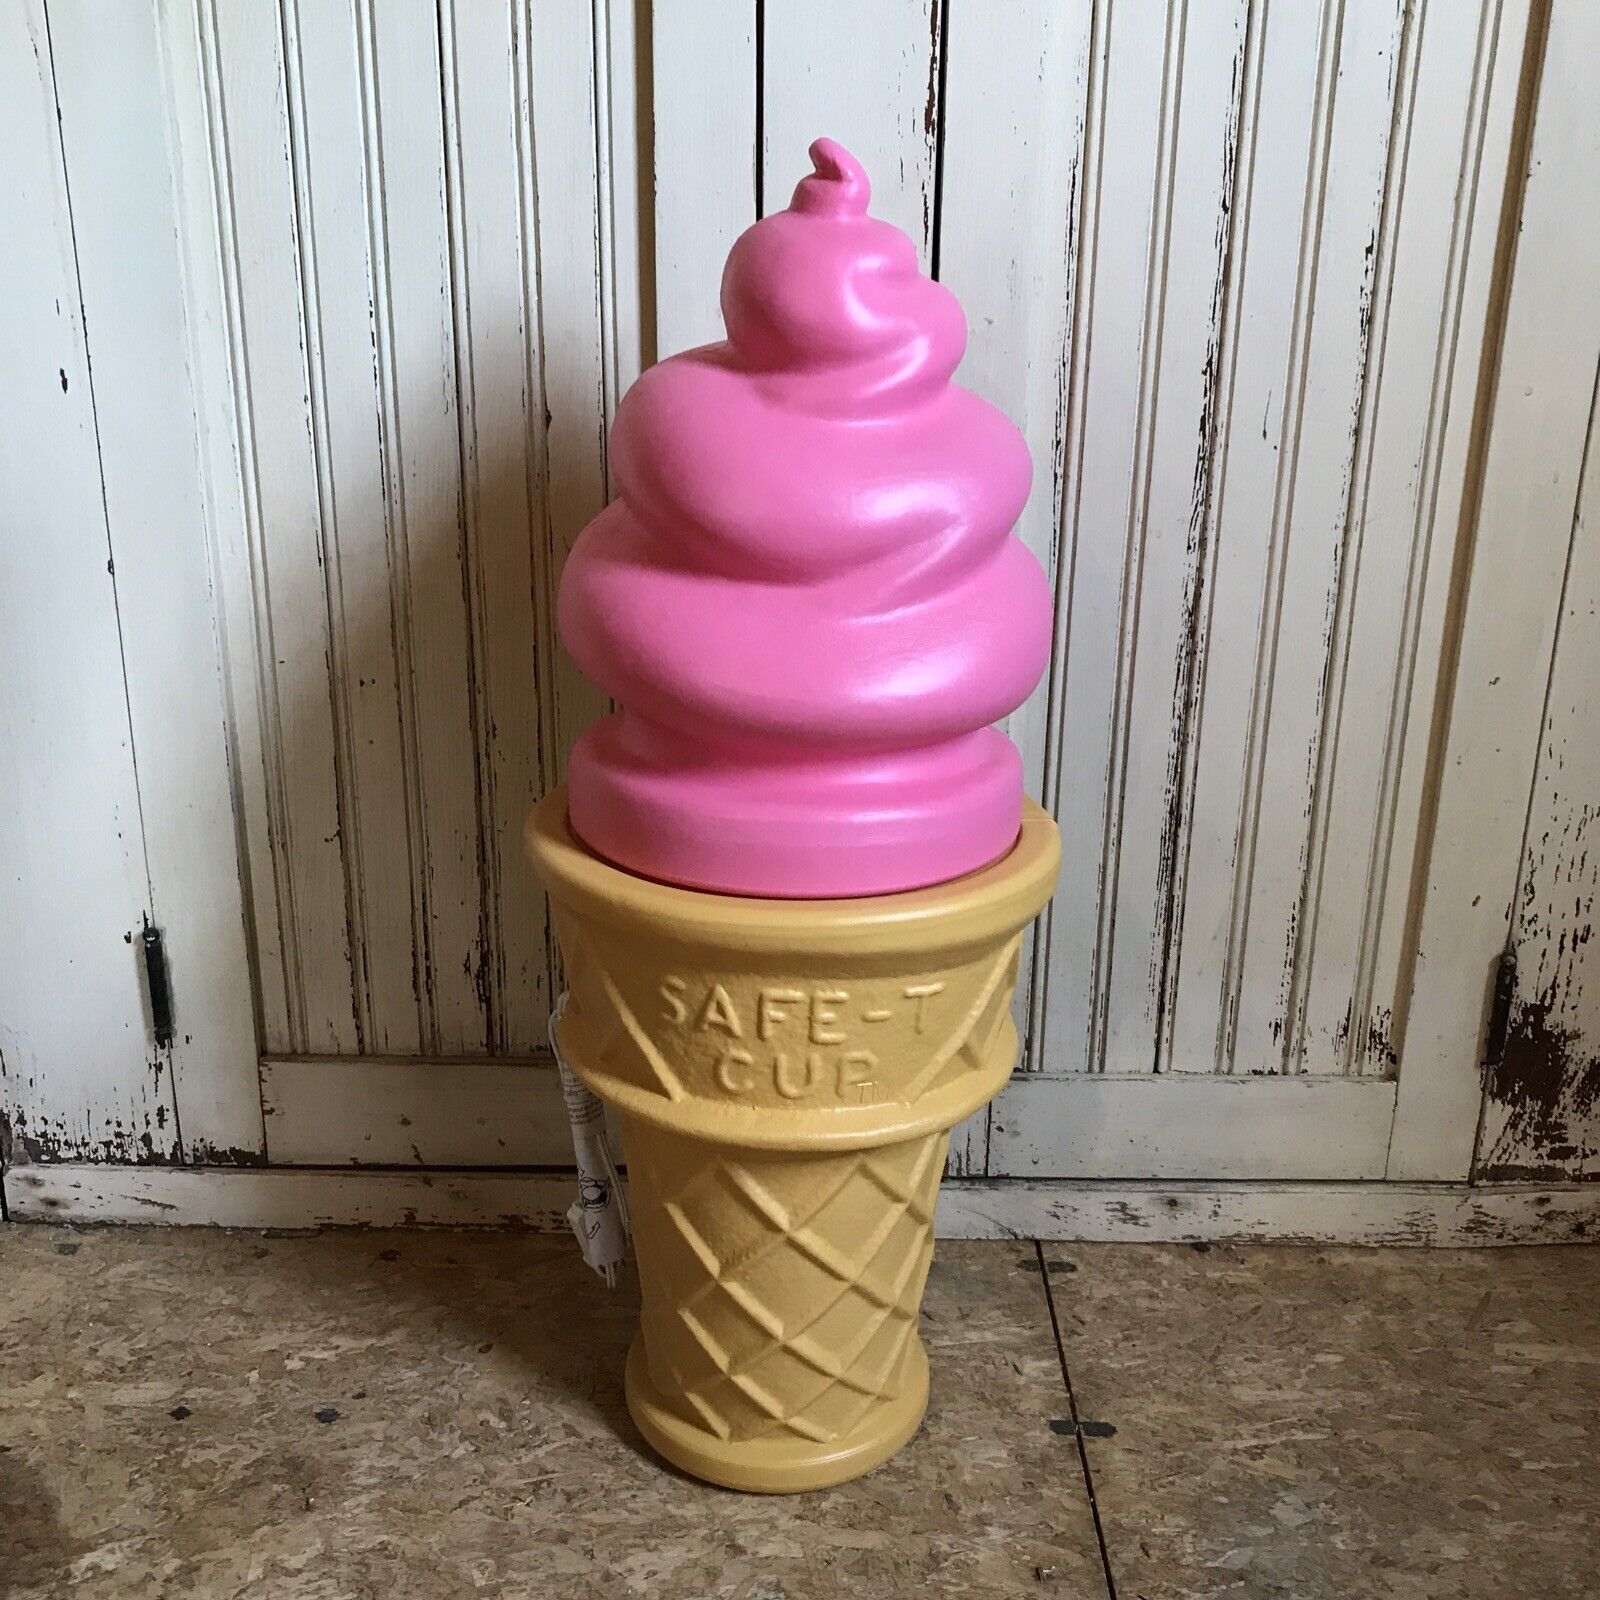 Blow Mold Giant Plastic Ice Cream Cone Strawberry Swirl Safe T Cup LIGHTED PINK